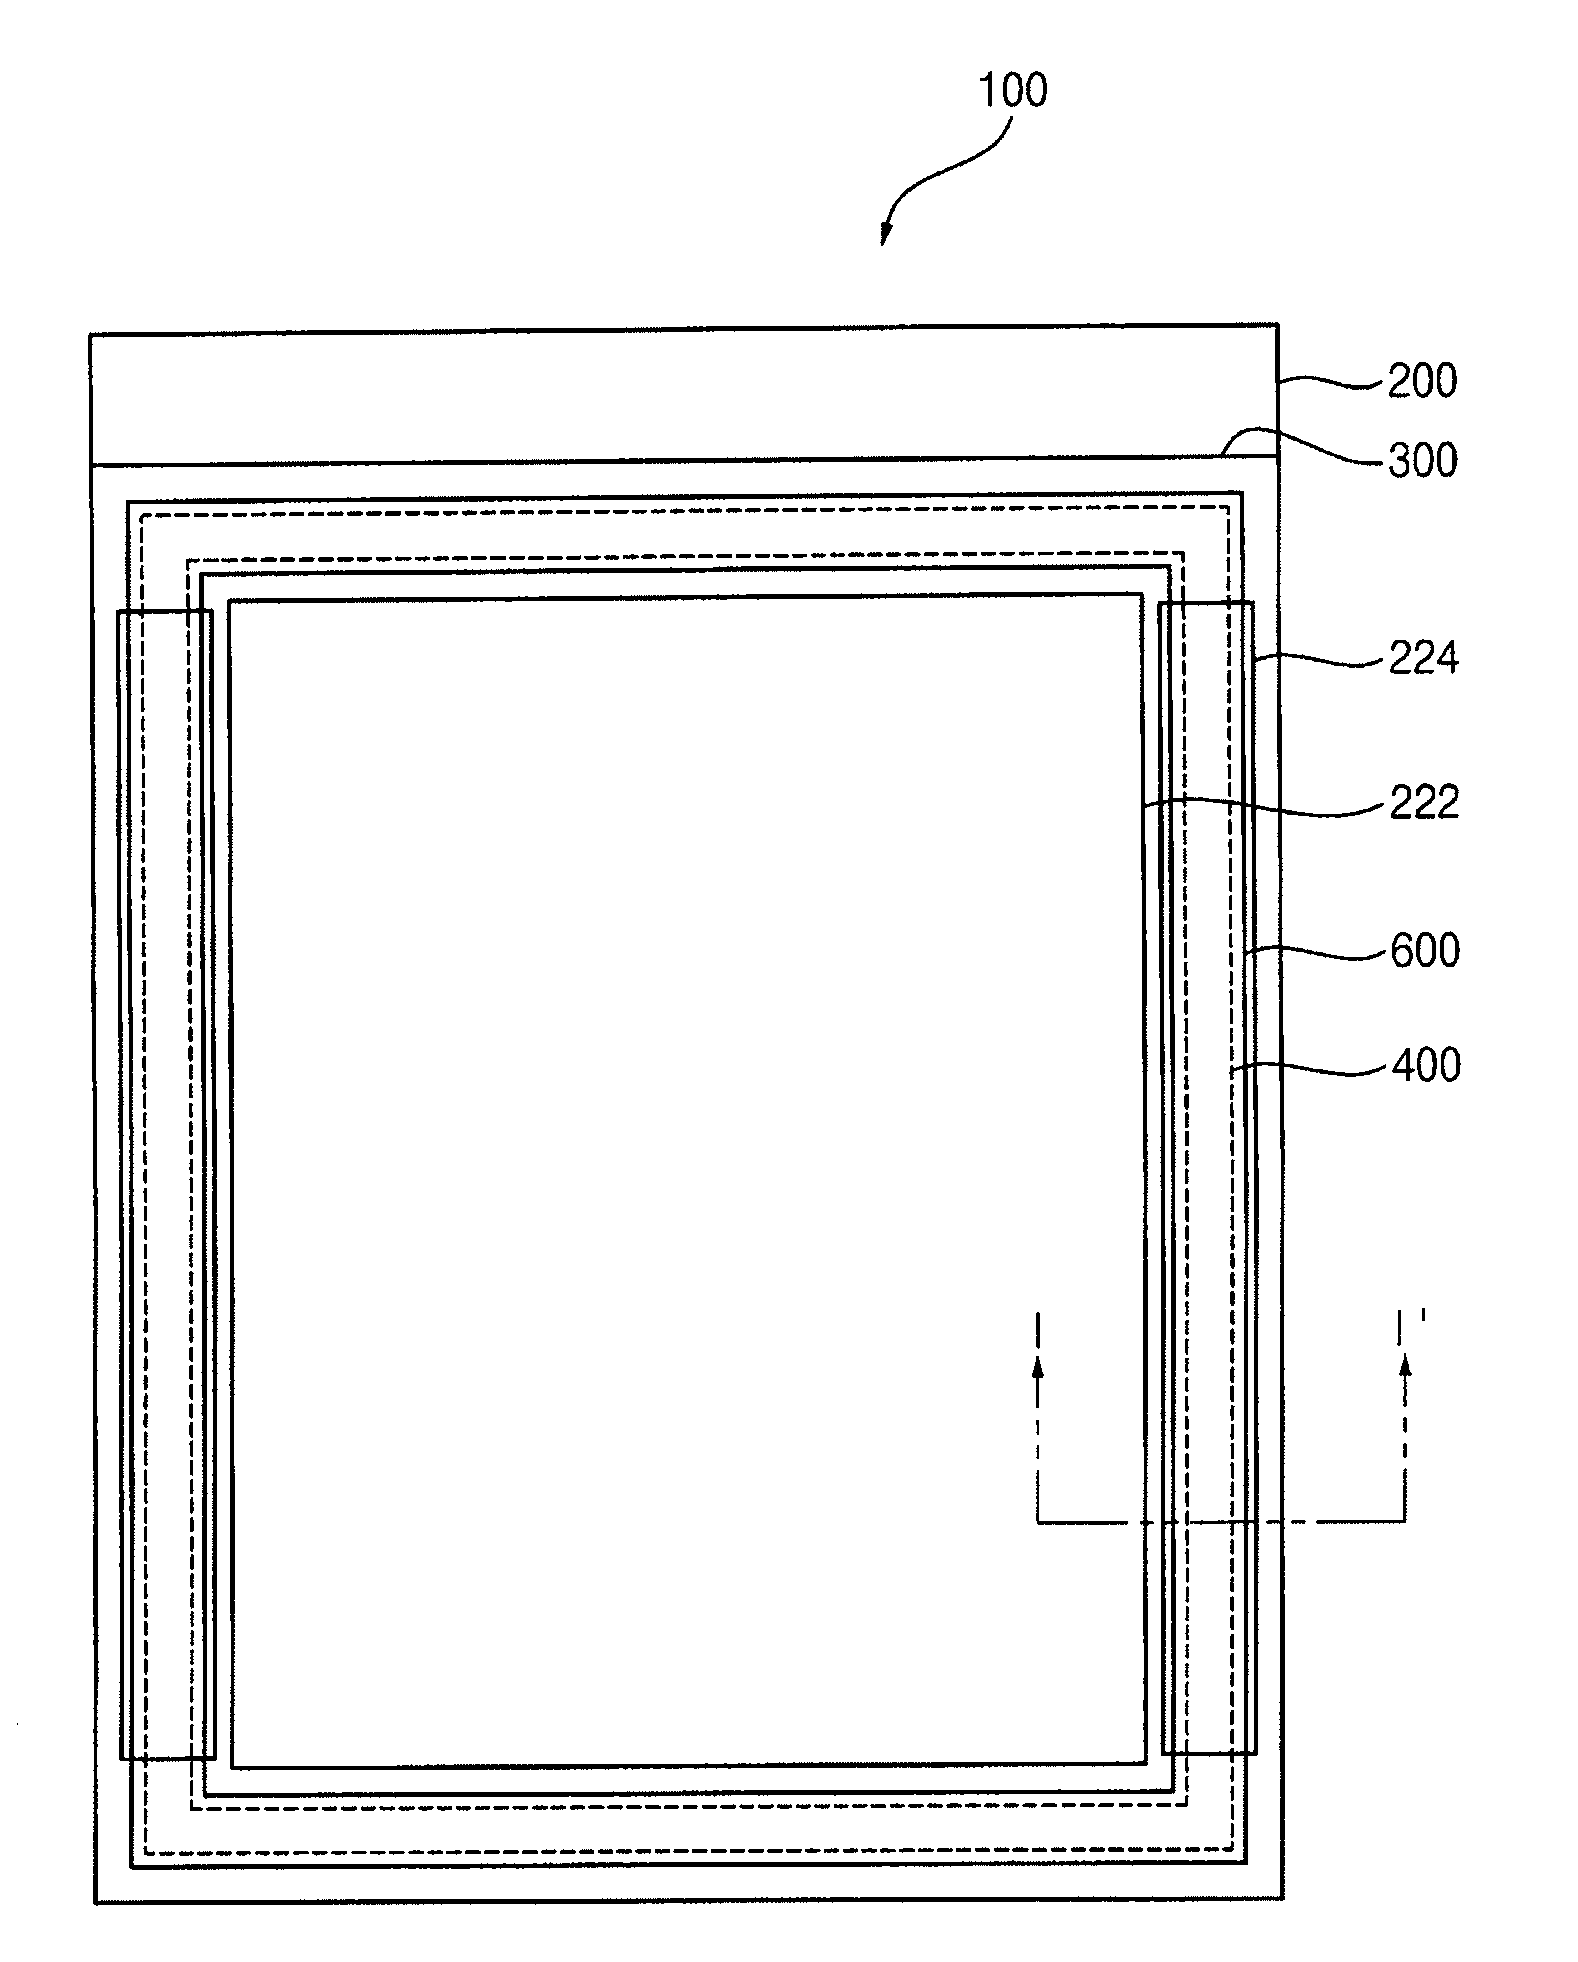 Display panel, method for manufacturing the same, motherboard for manufacturing the same and method for manufacturing a display substrate for the same